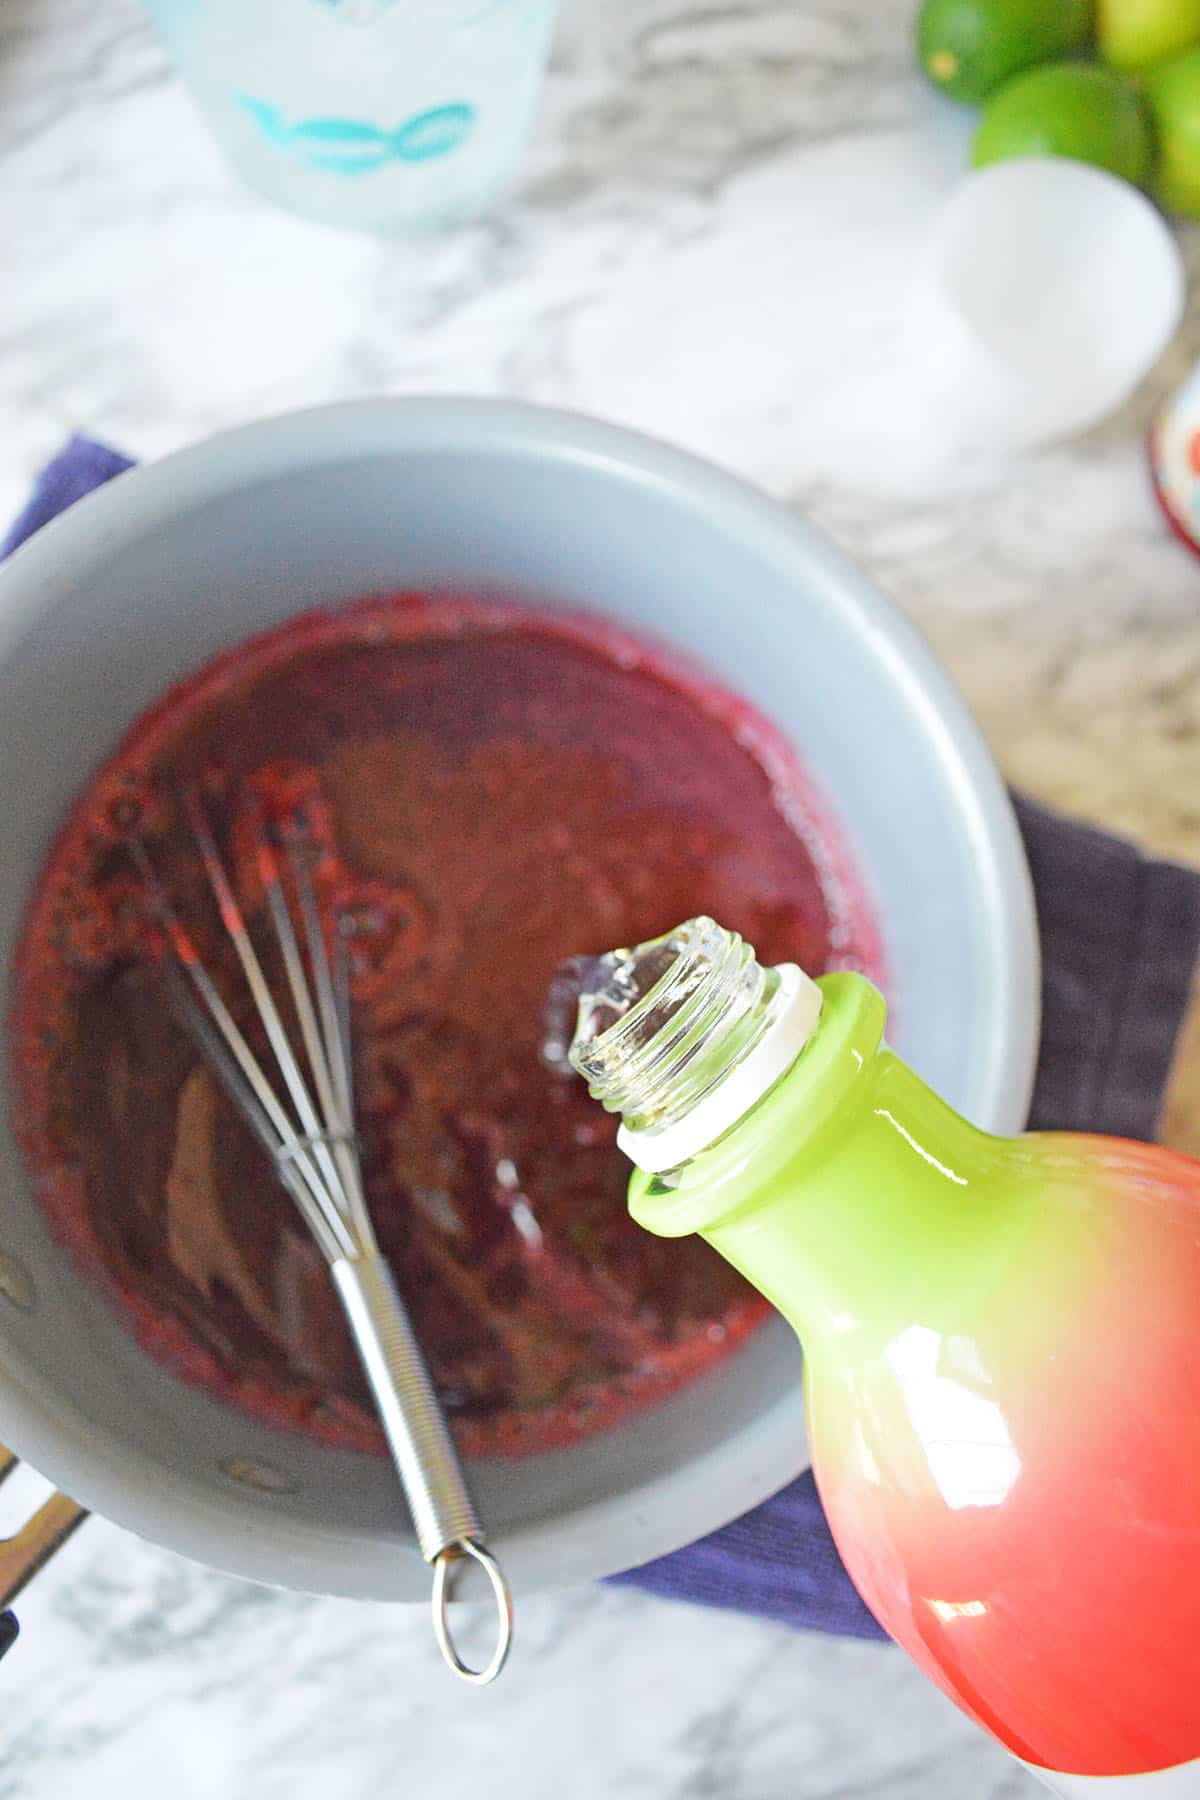 Jello mix in red color with pouring vodka, wire whisk in the saucepan